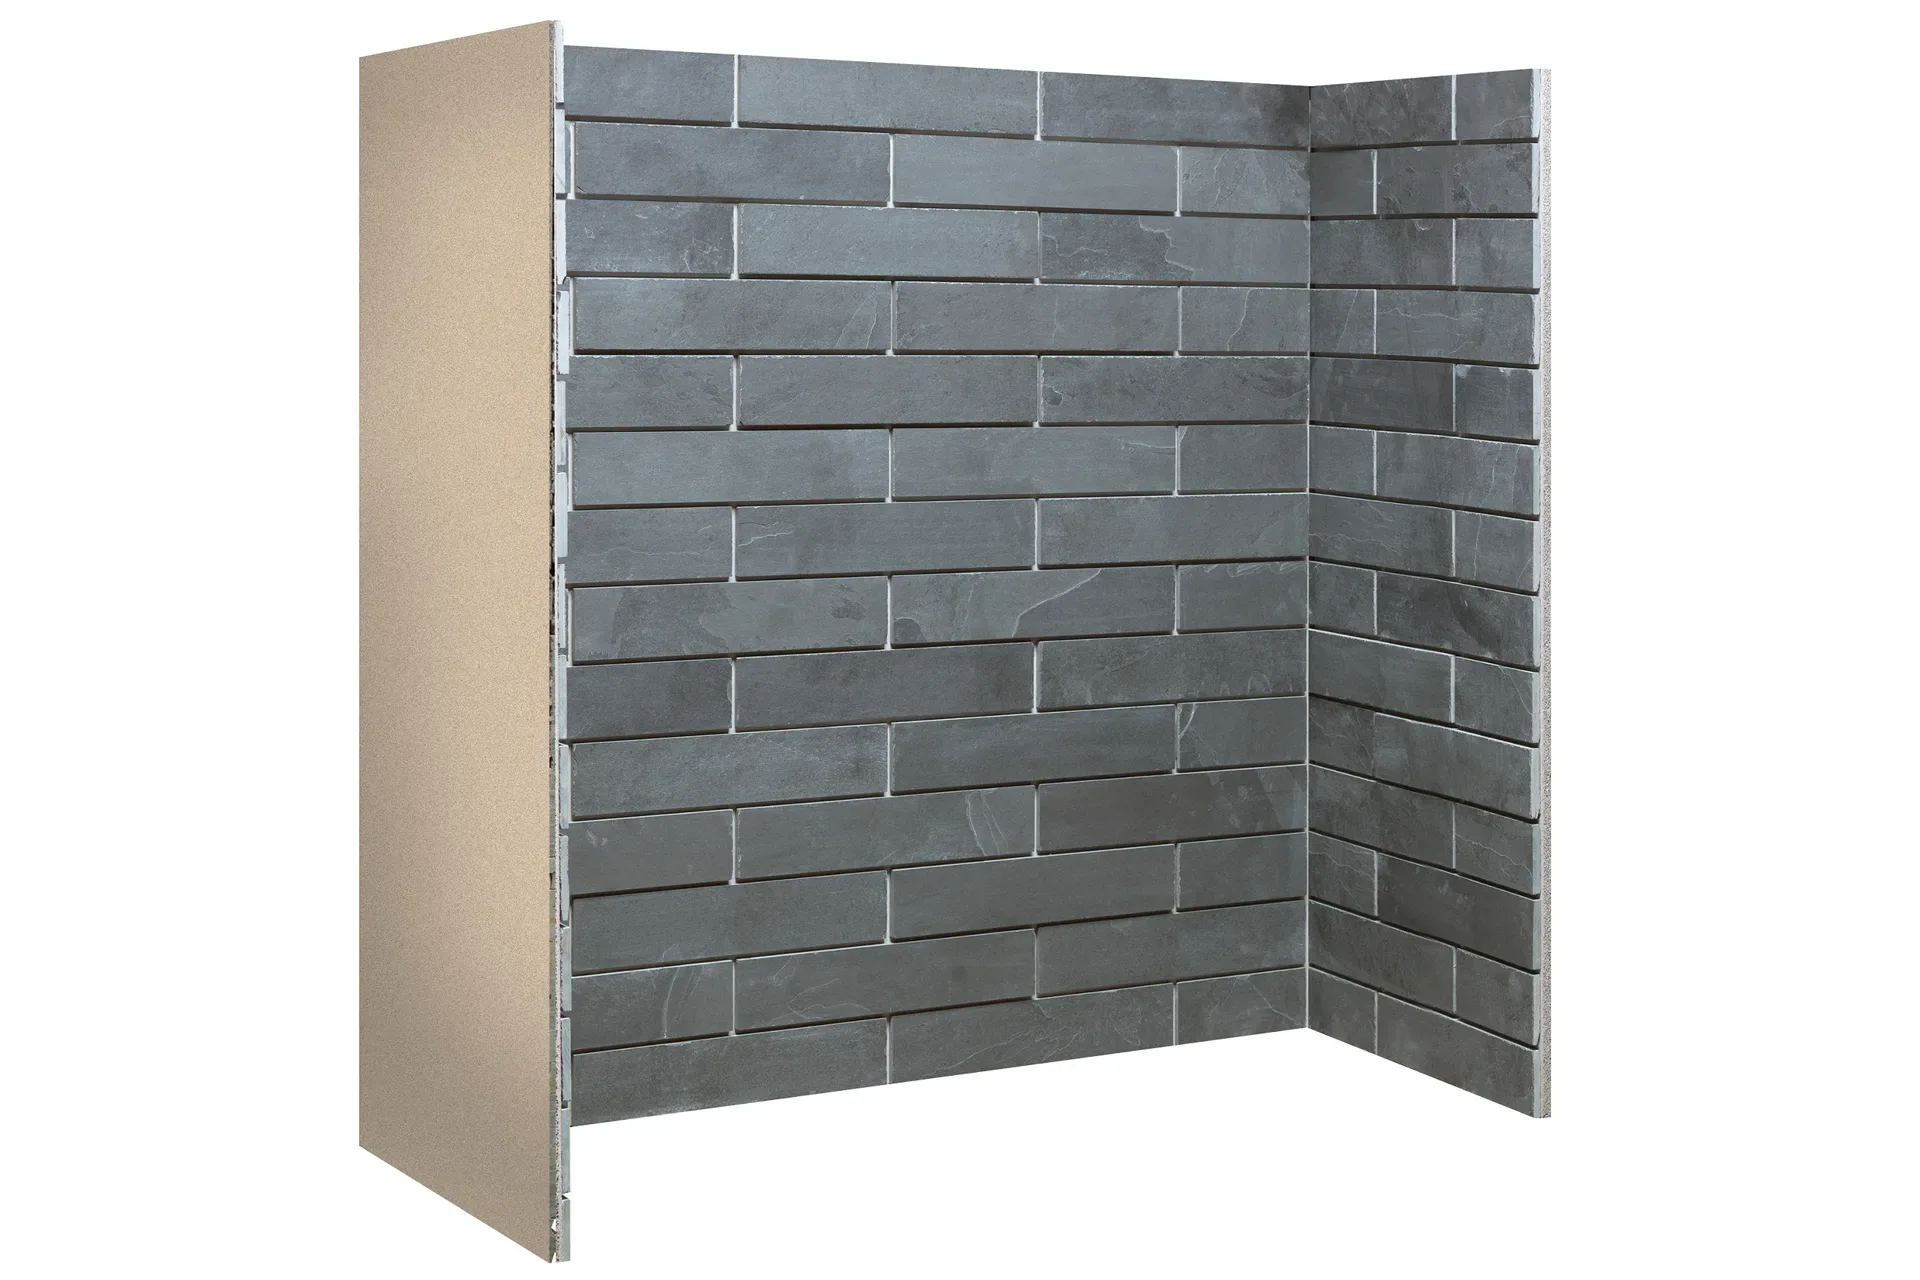 The Gallery Collection PORCELAIN SLATE BRICK Chamber